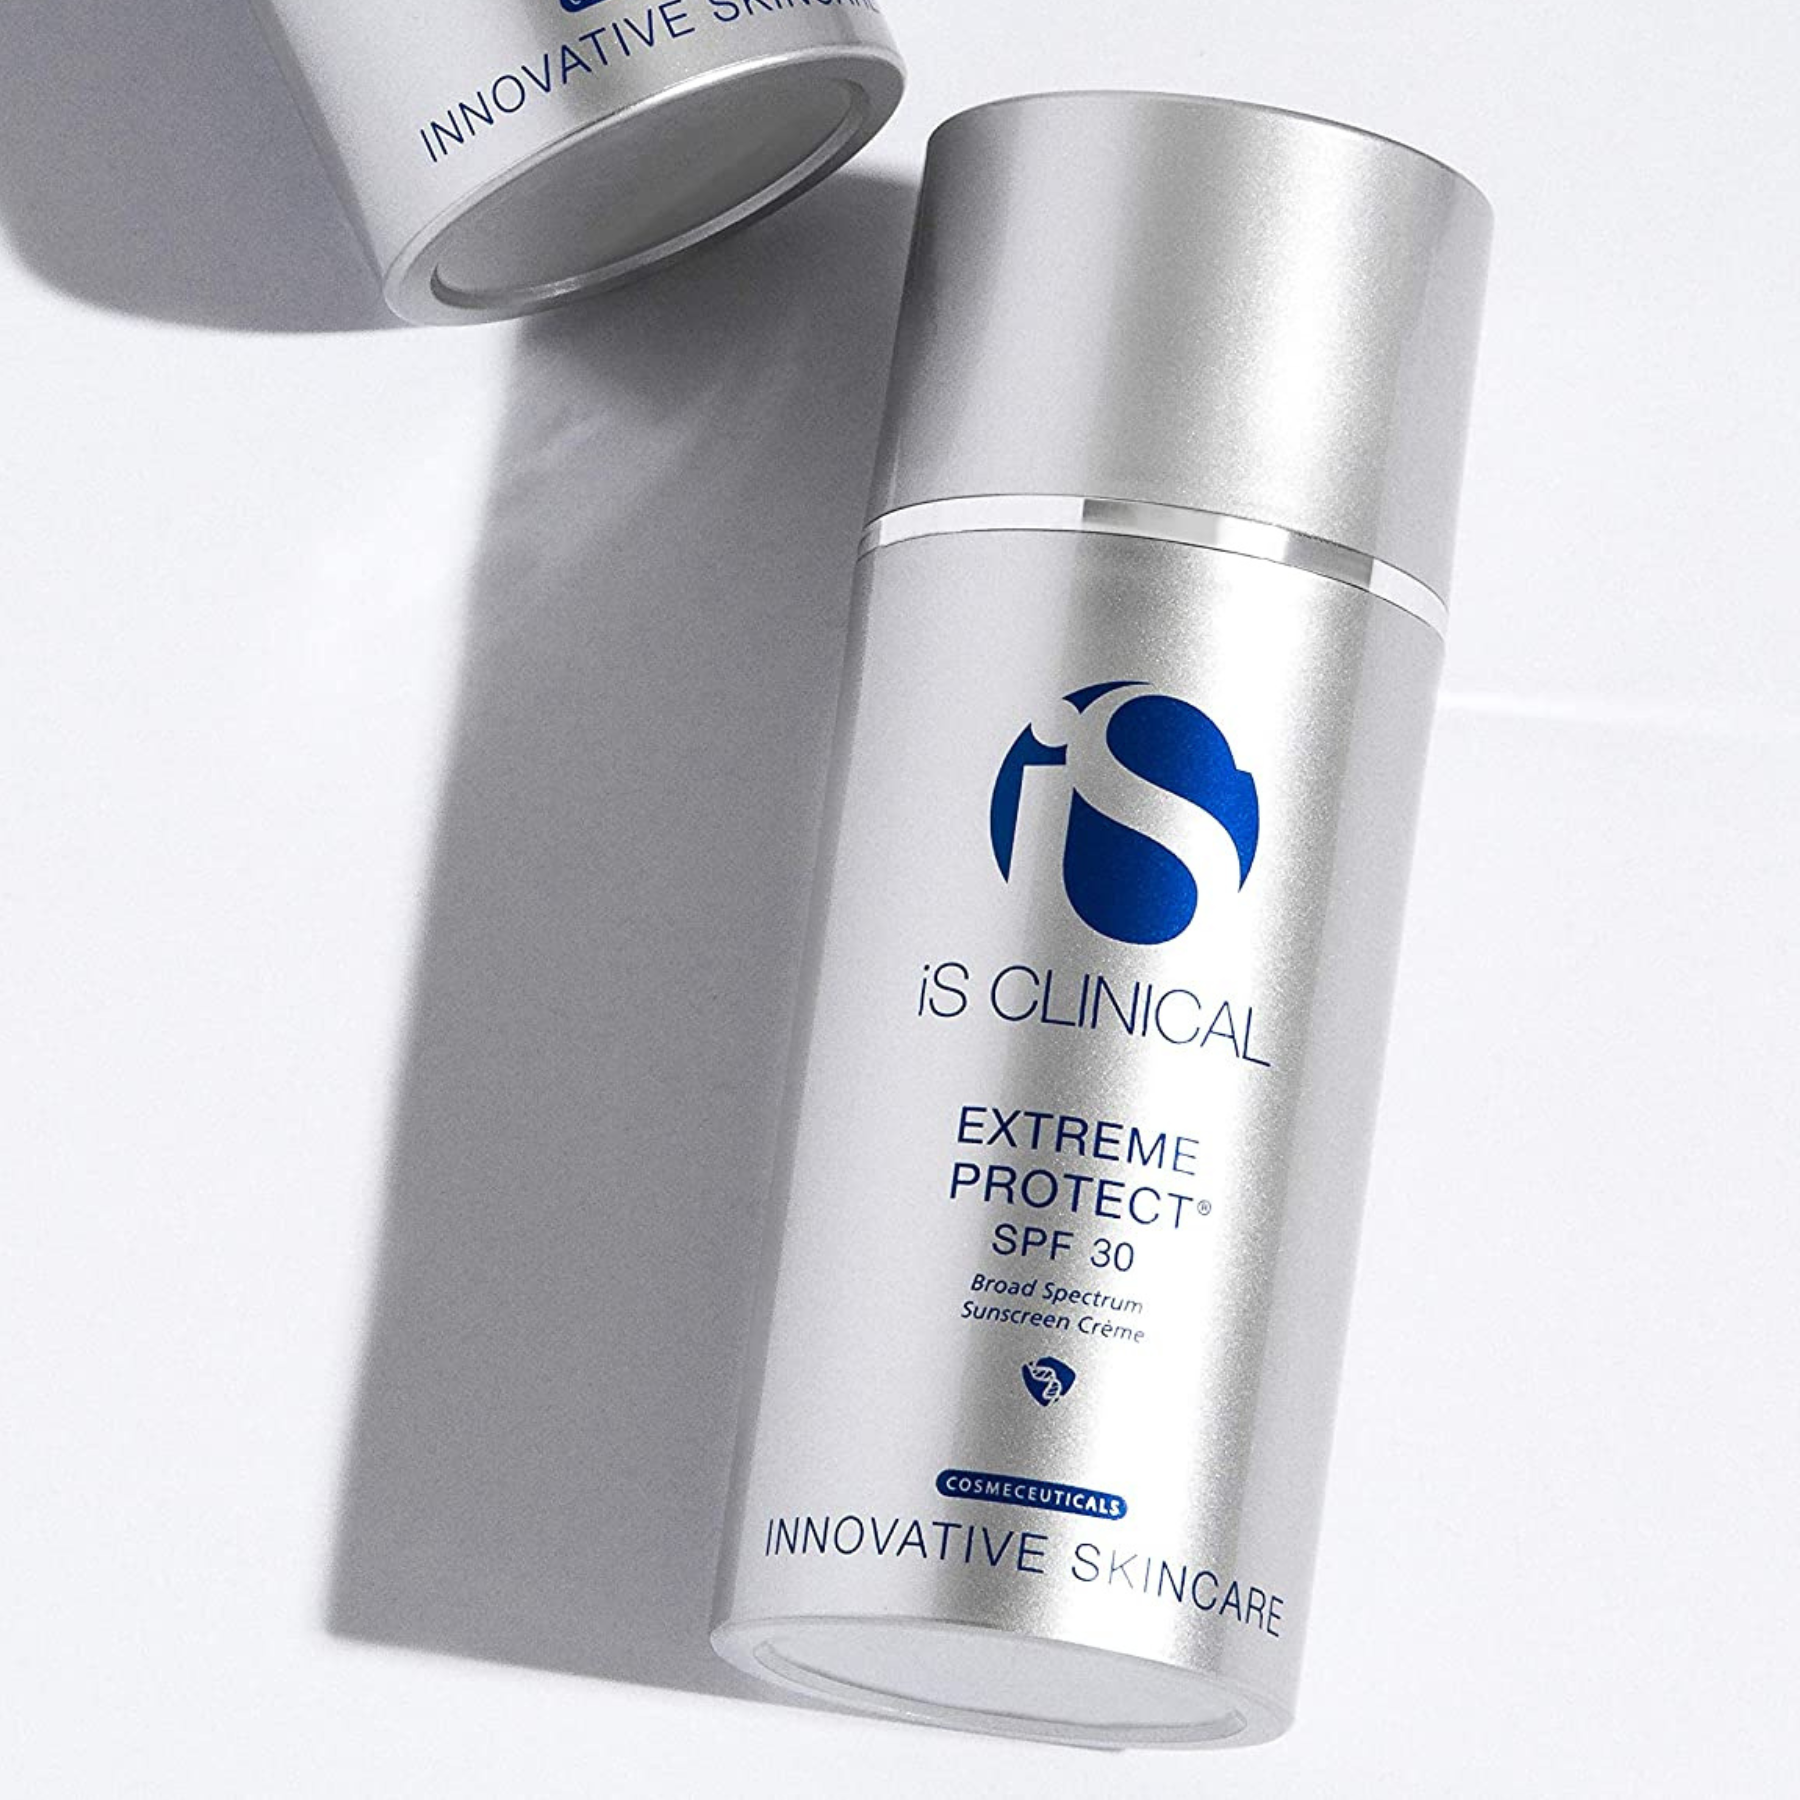 Солнцезащитный крем Extreme Protect SPF 30 iS Clinical, 100гр.